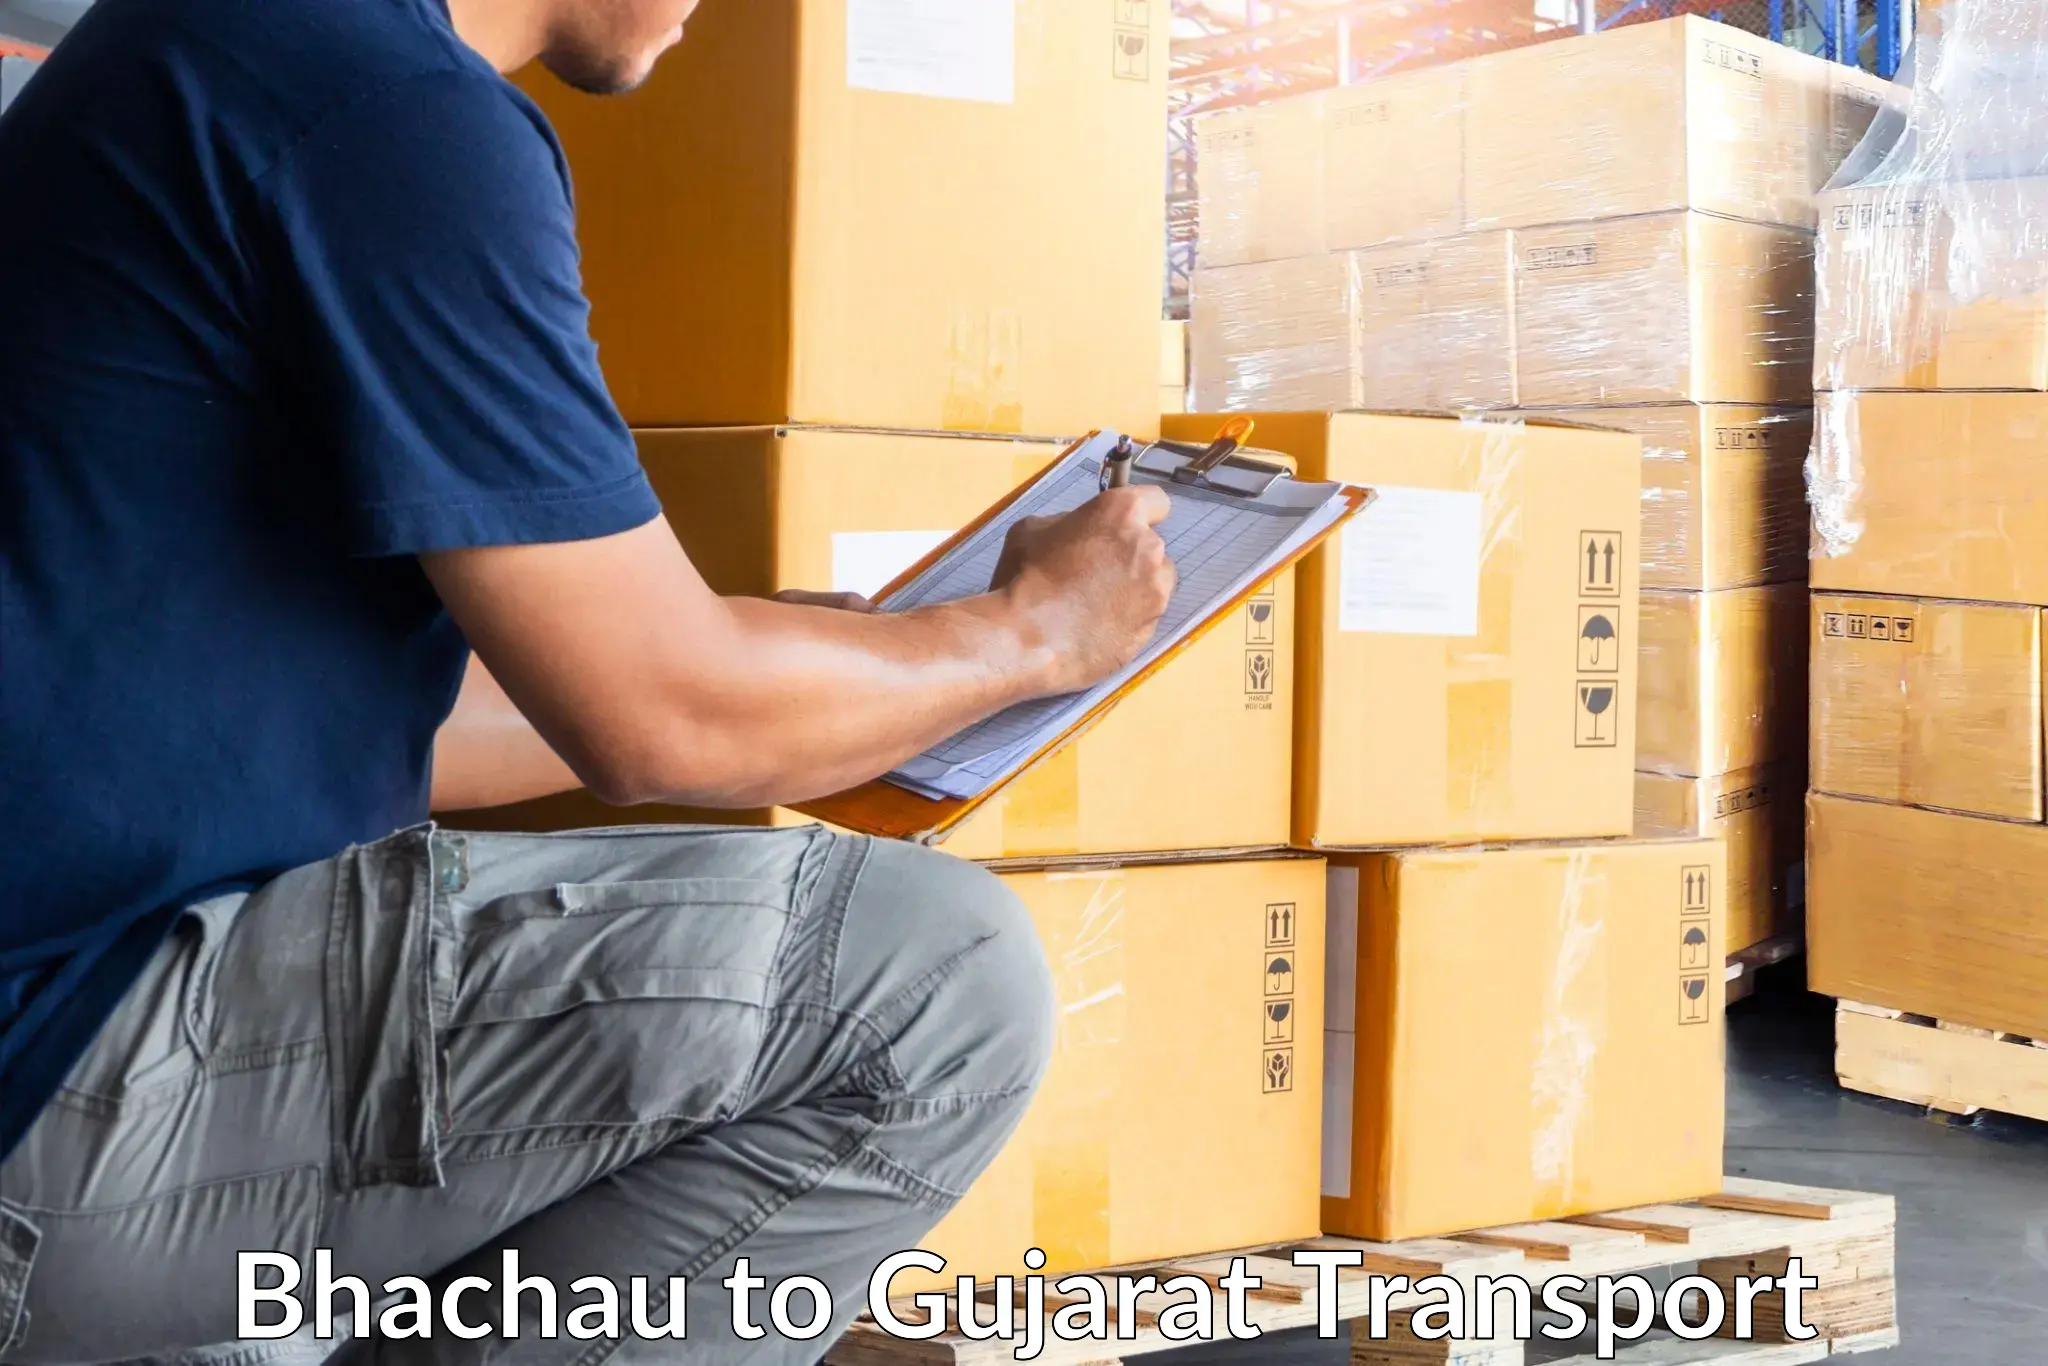 Truck transport companies in India Bhachau to Panchmahal